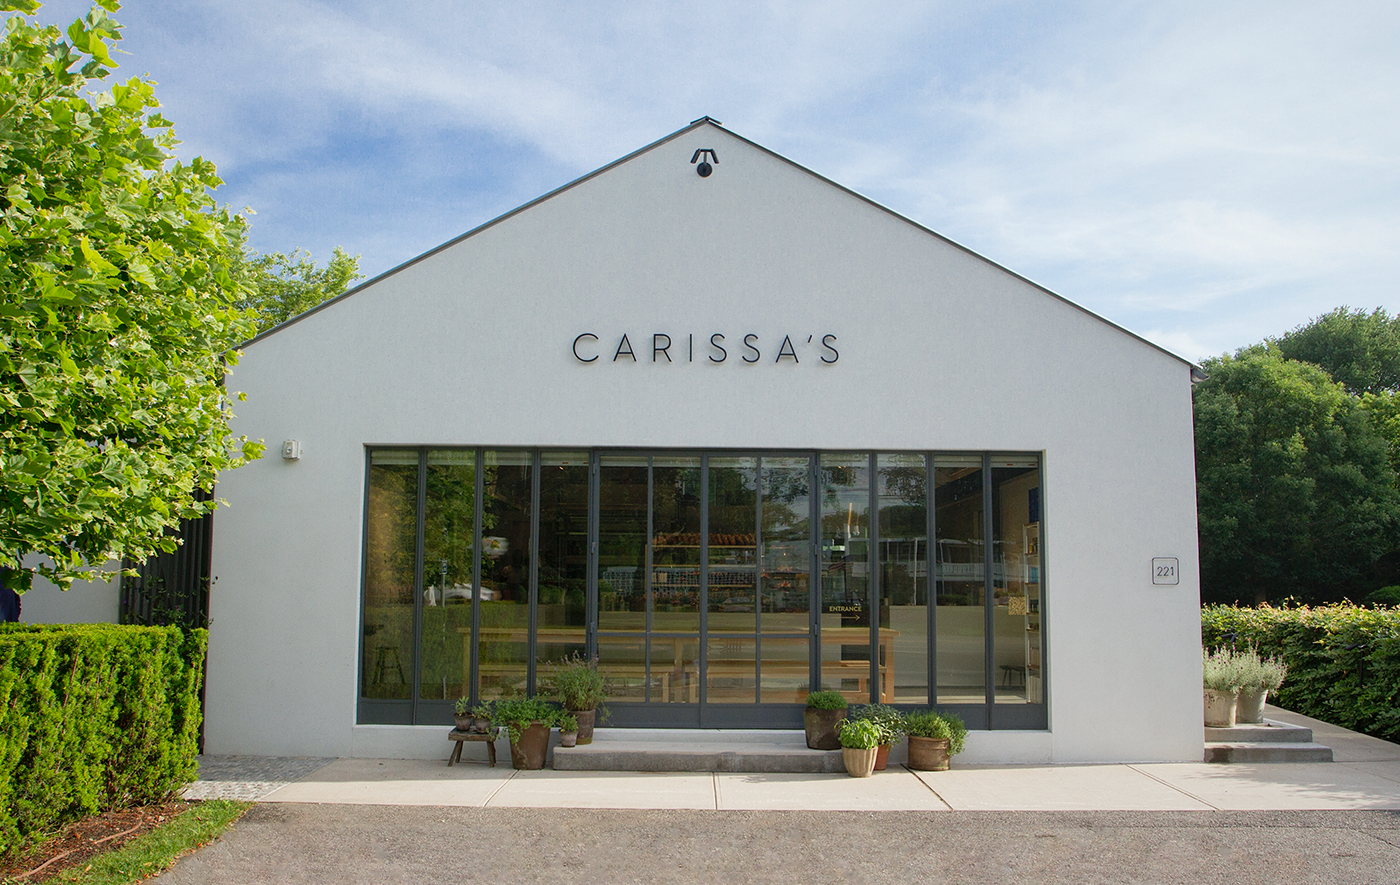 Exterior of Carissa's bakery in the Hamtons